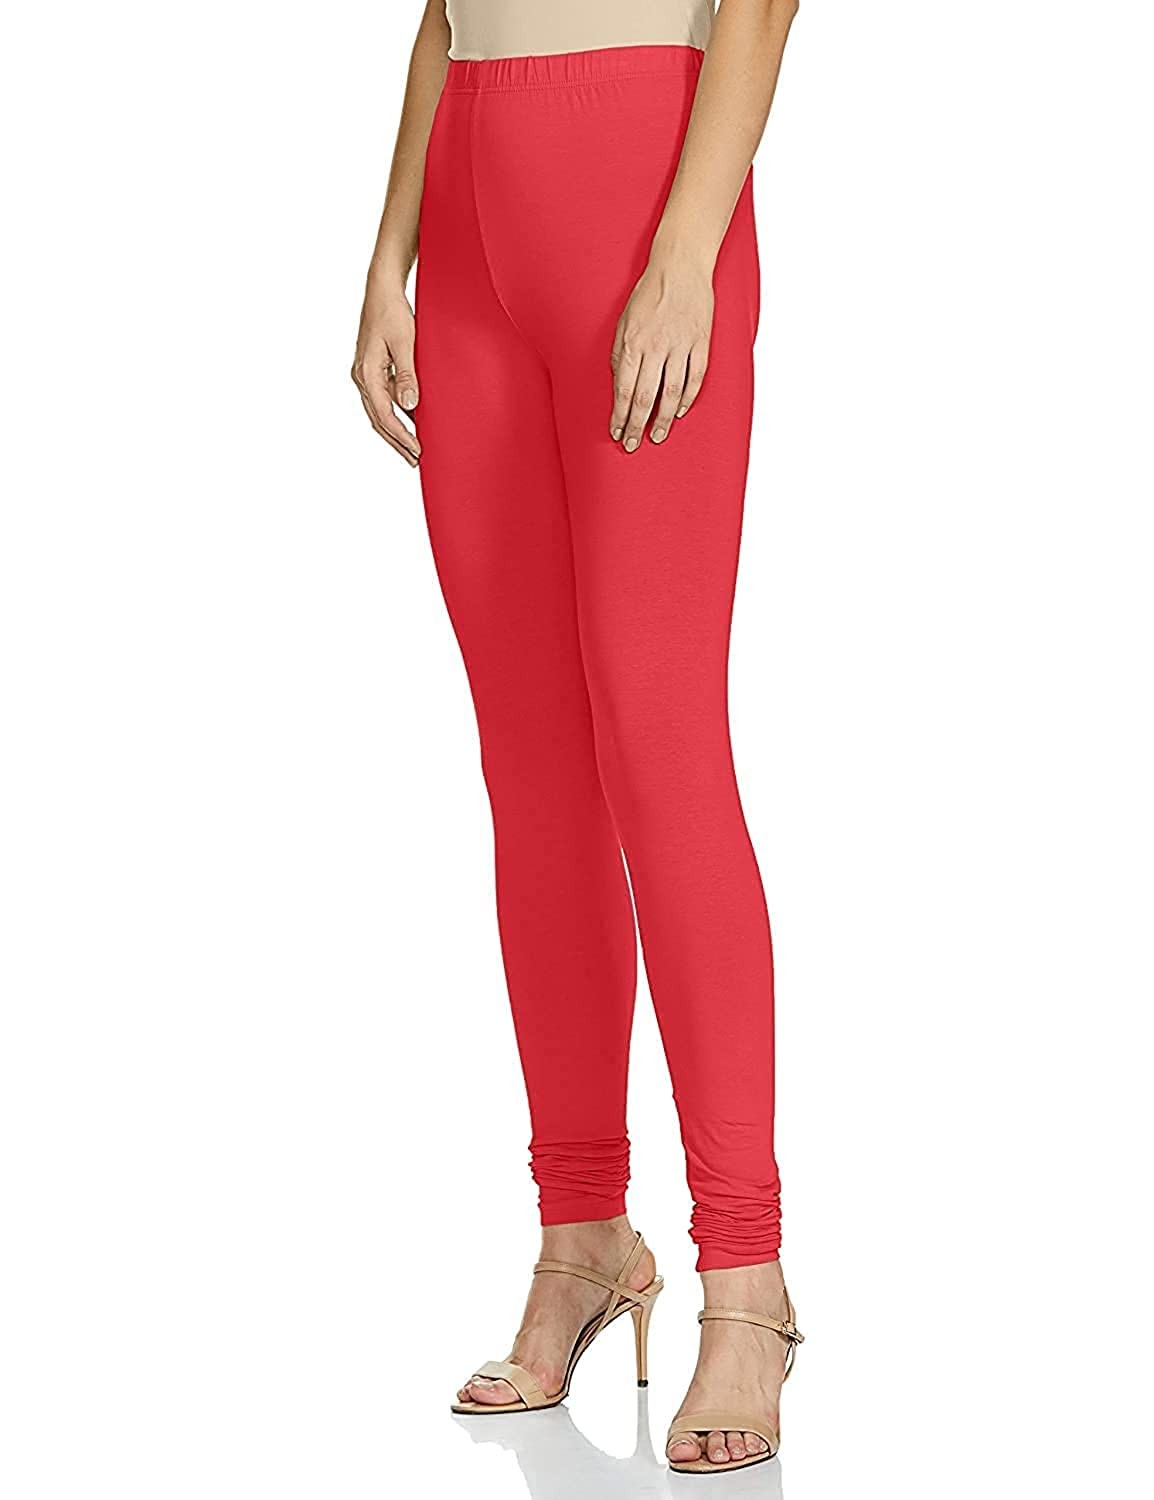 MM Style- Women's 4-Way Stretch Leggings for Every Occasion (Dark red)